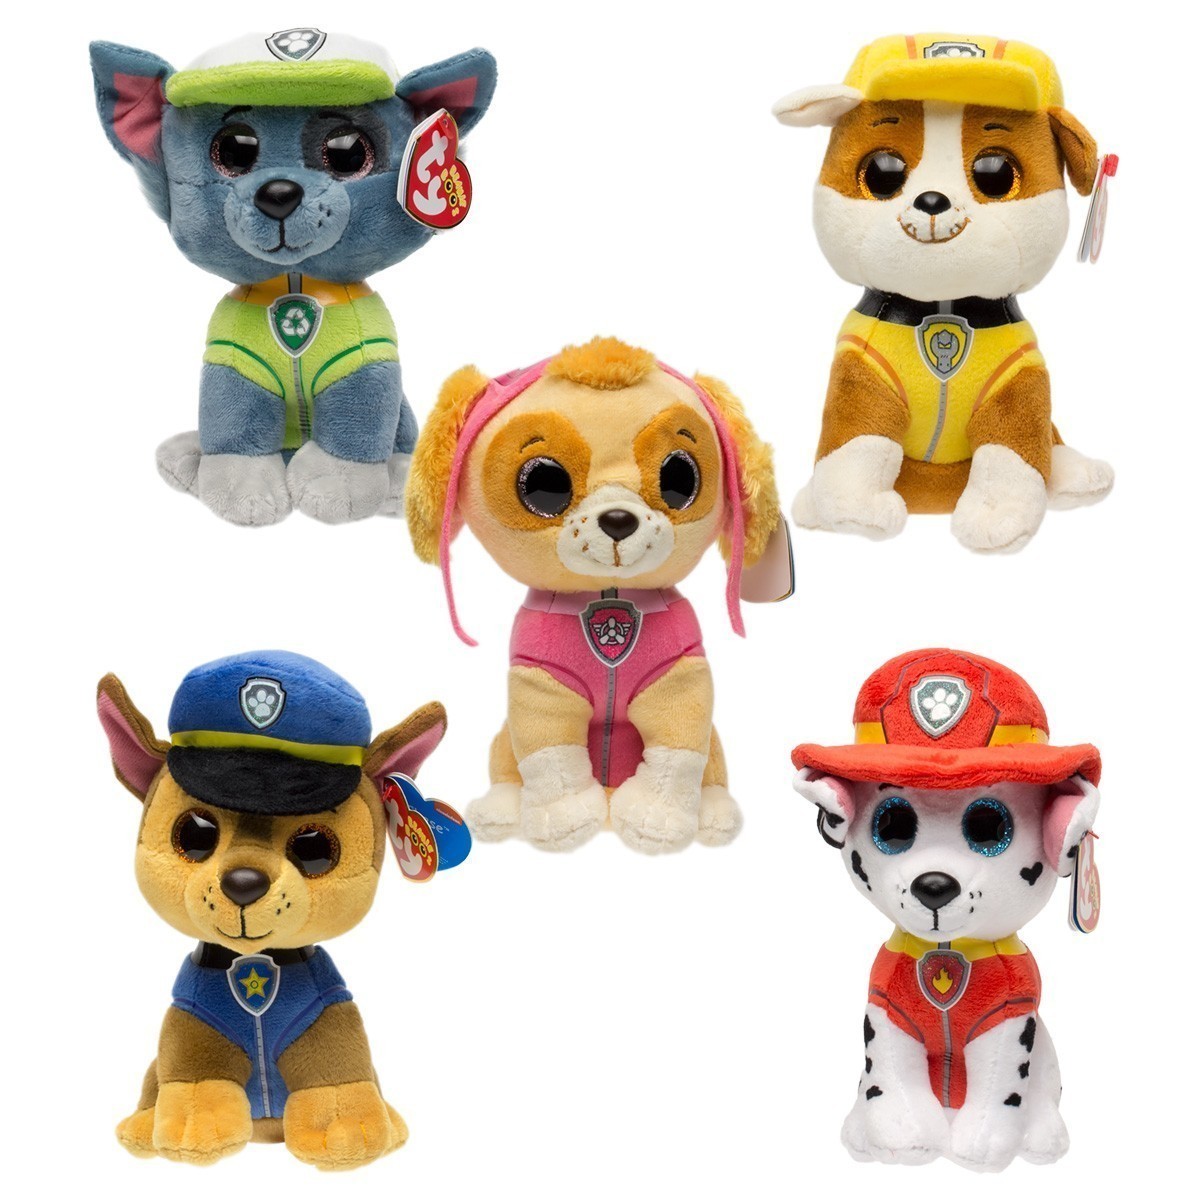 Nickelodeon - Paw Patrol Beanie Boo Collection